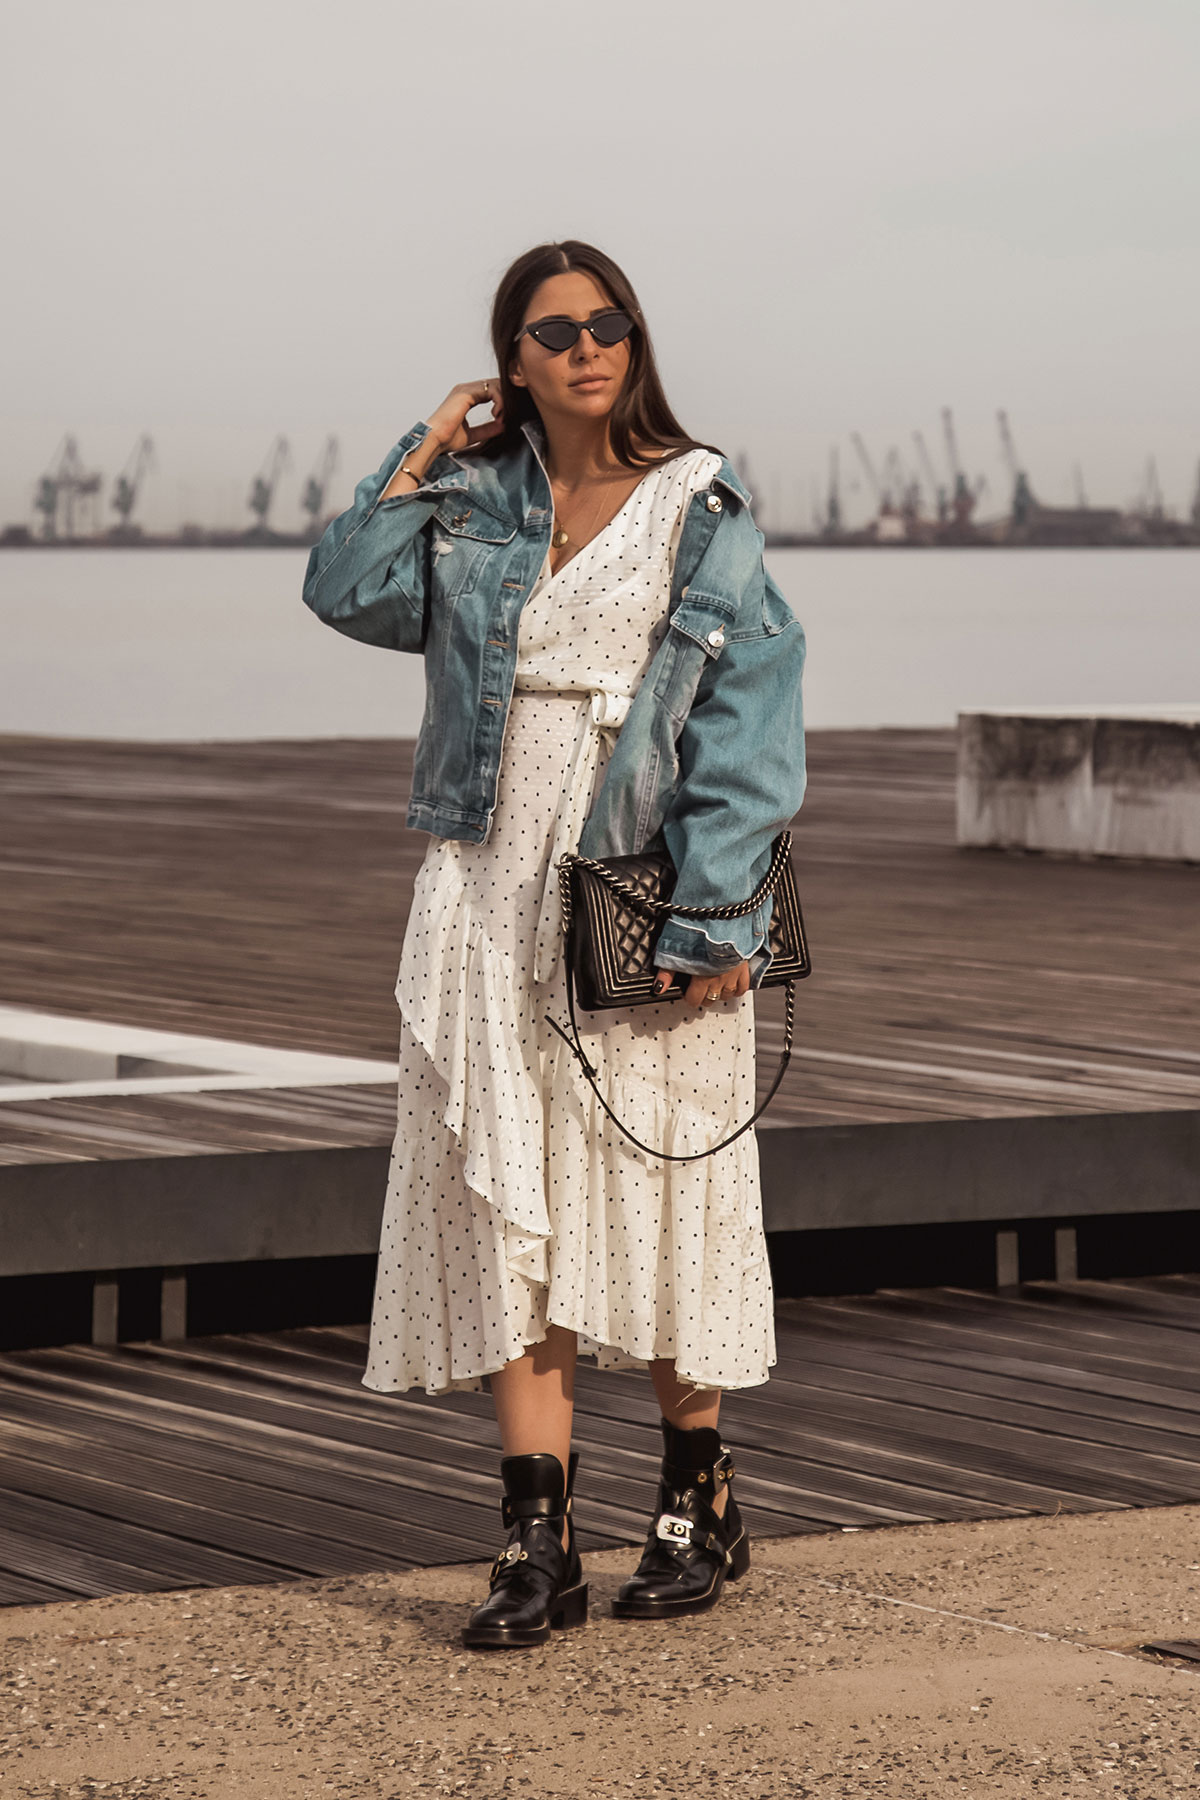 polka dot dress with edgy boots and denim jacket by Stella Asteria - Fashion & Lifestyle Blogger